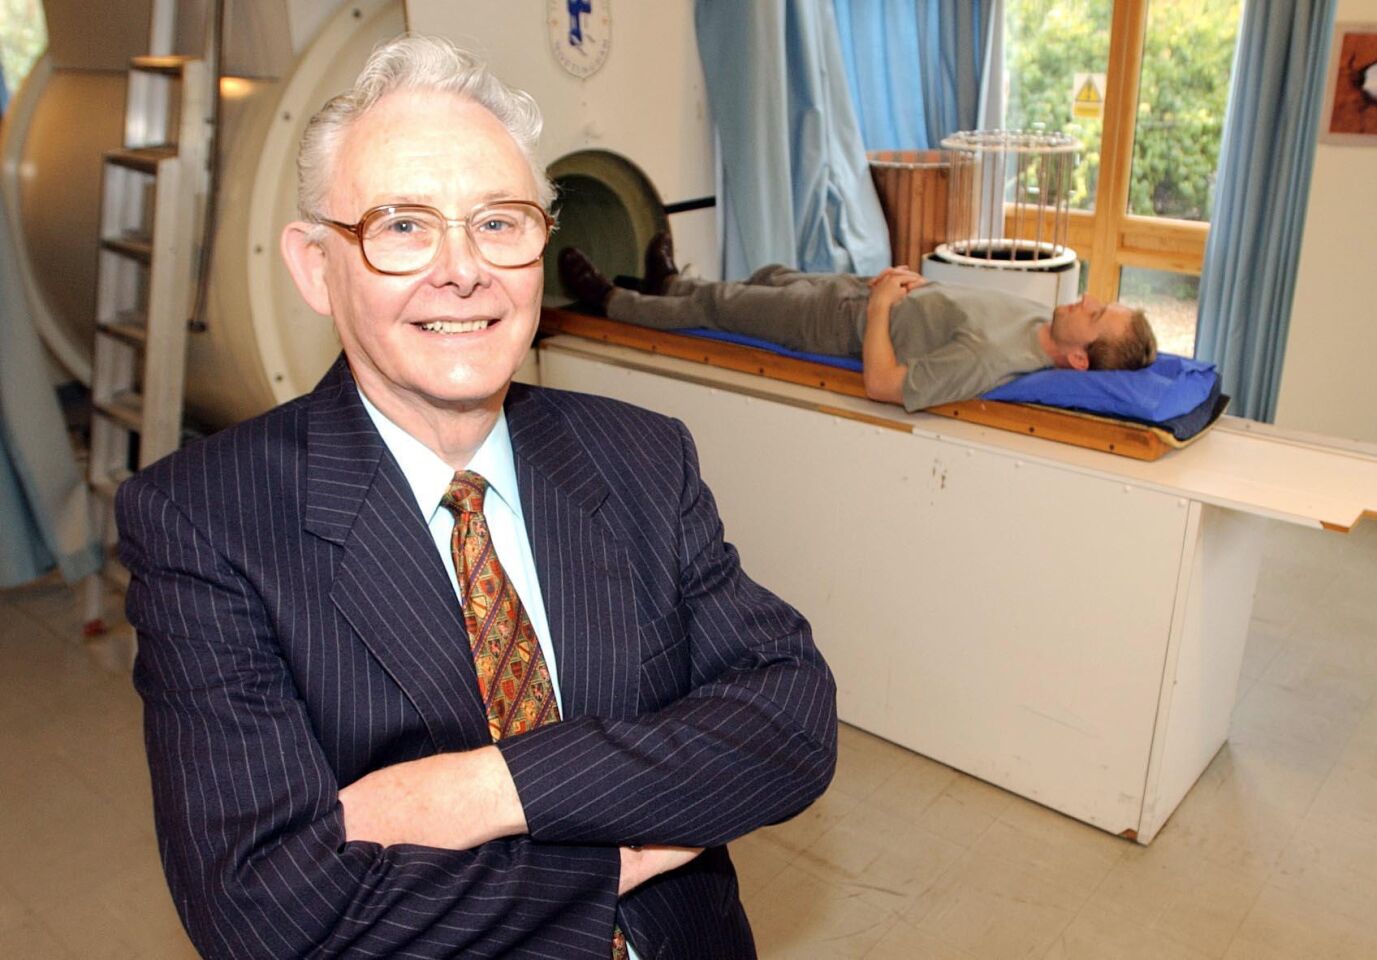 Mansfield won the Nobel Prize for helping to invent MRI scanners. In 1978, he was the first person to step inside a whole-body MRI scanner so it could be tested on a human subject. His work, alongside chemist Paul Lauterbur, revolutionized the detection of disease by revealing internal organs without the need for surgery. He was 83. Full obituary